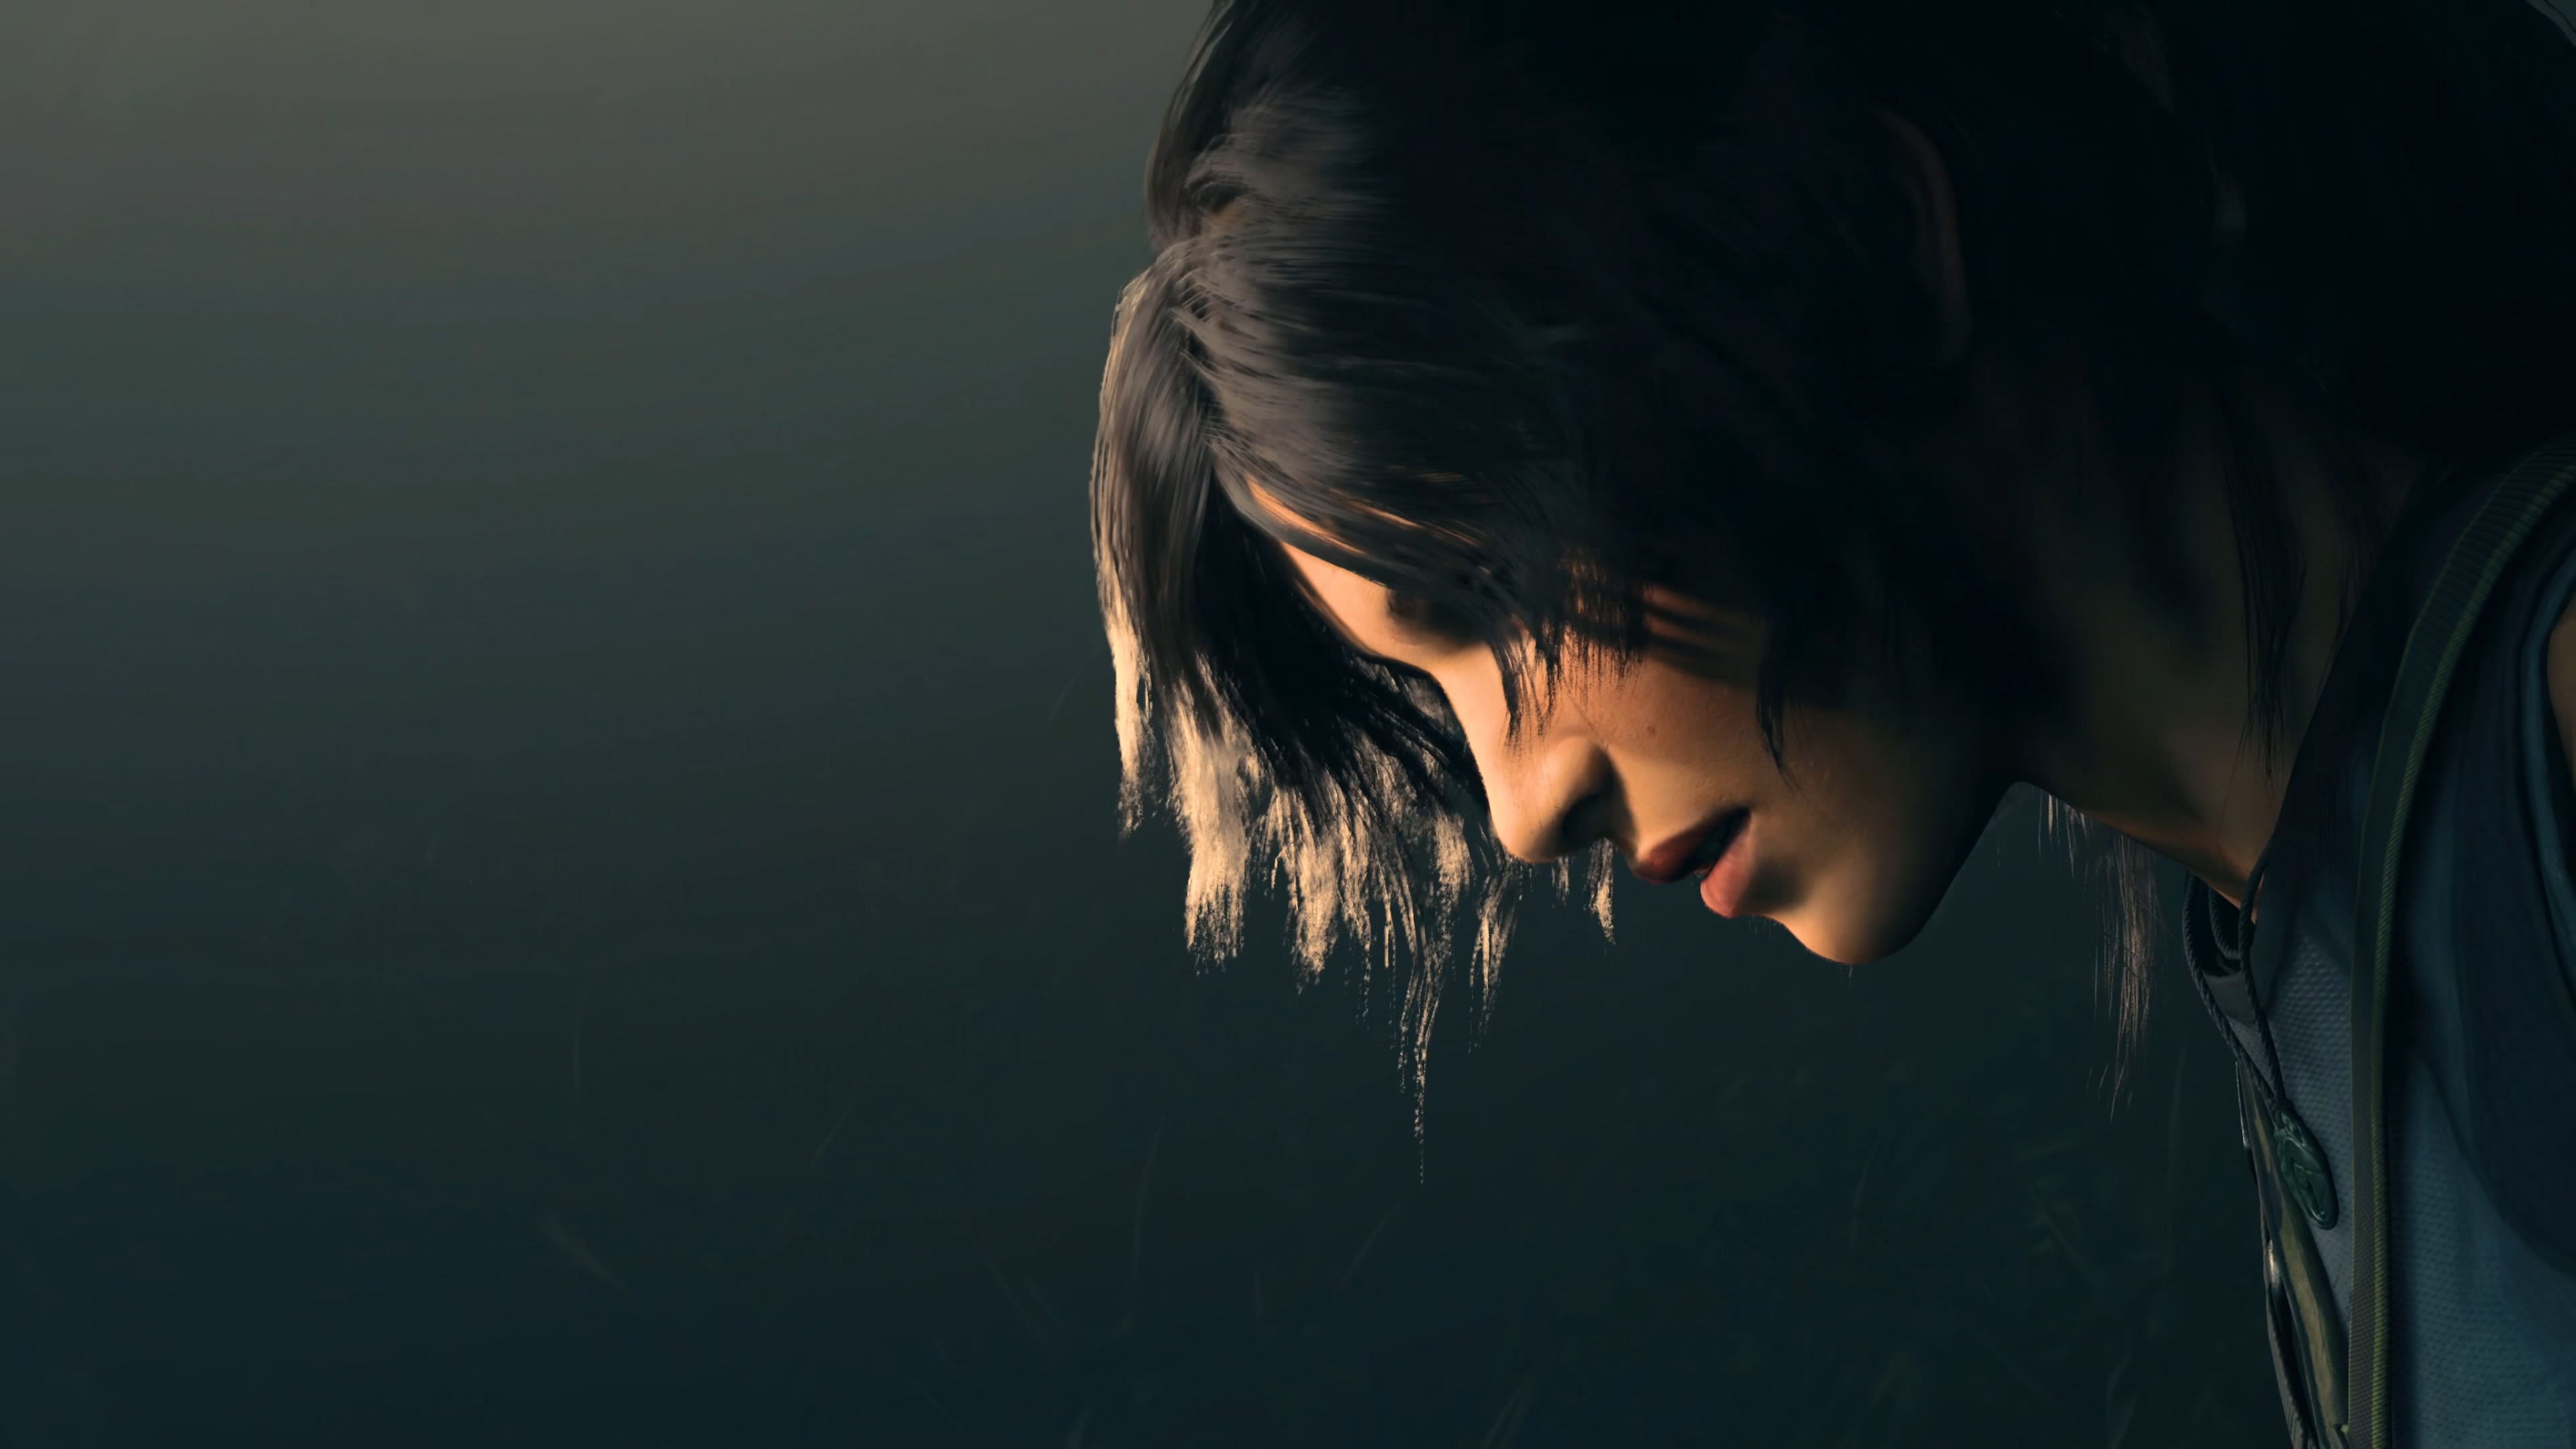 Shadow of the Tomb Raider Wallpapers